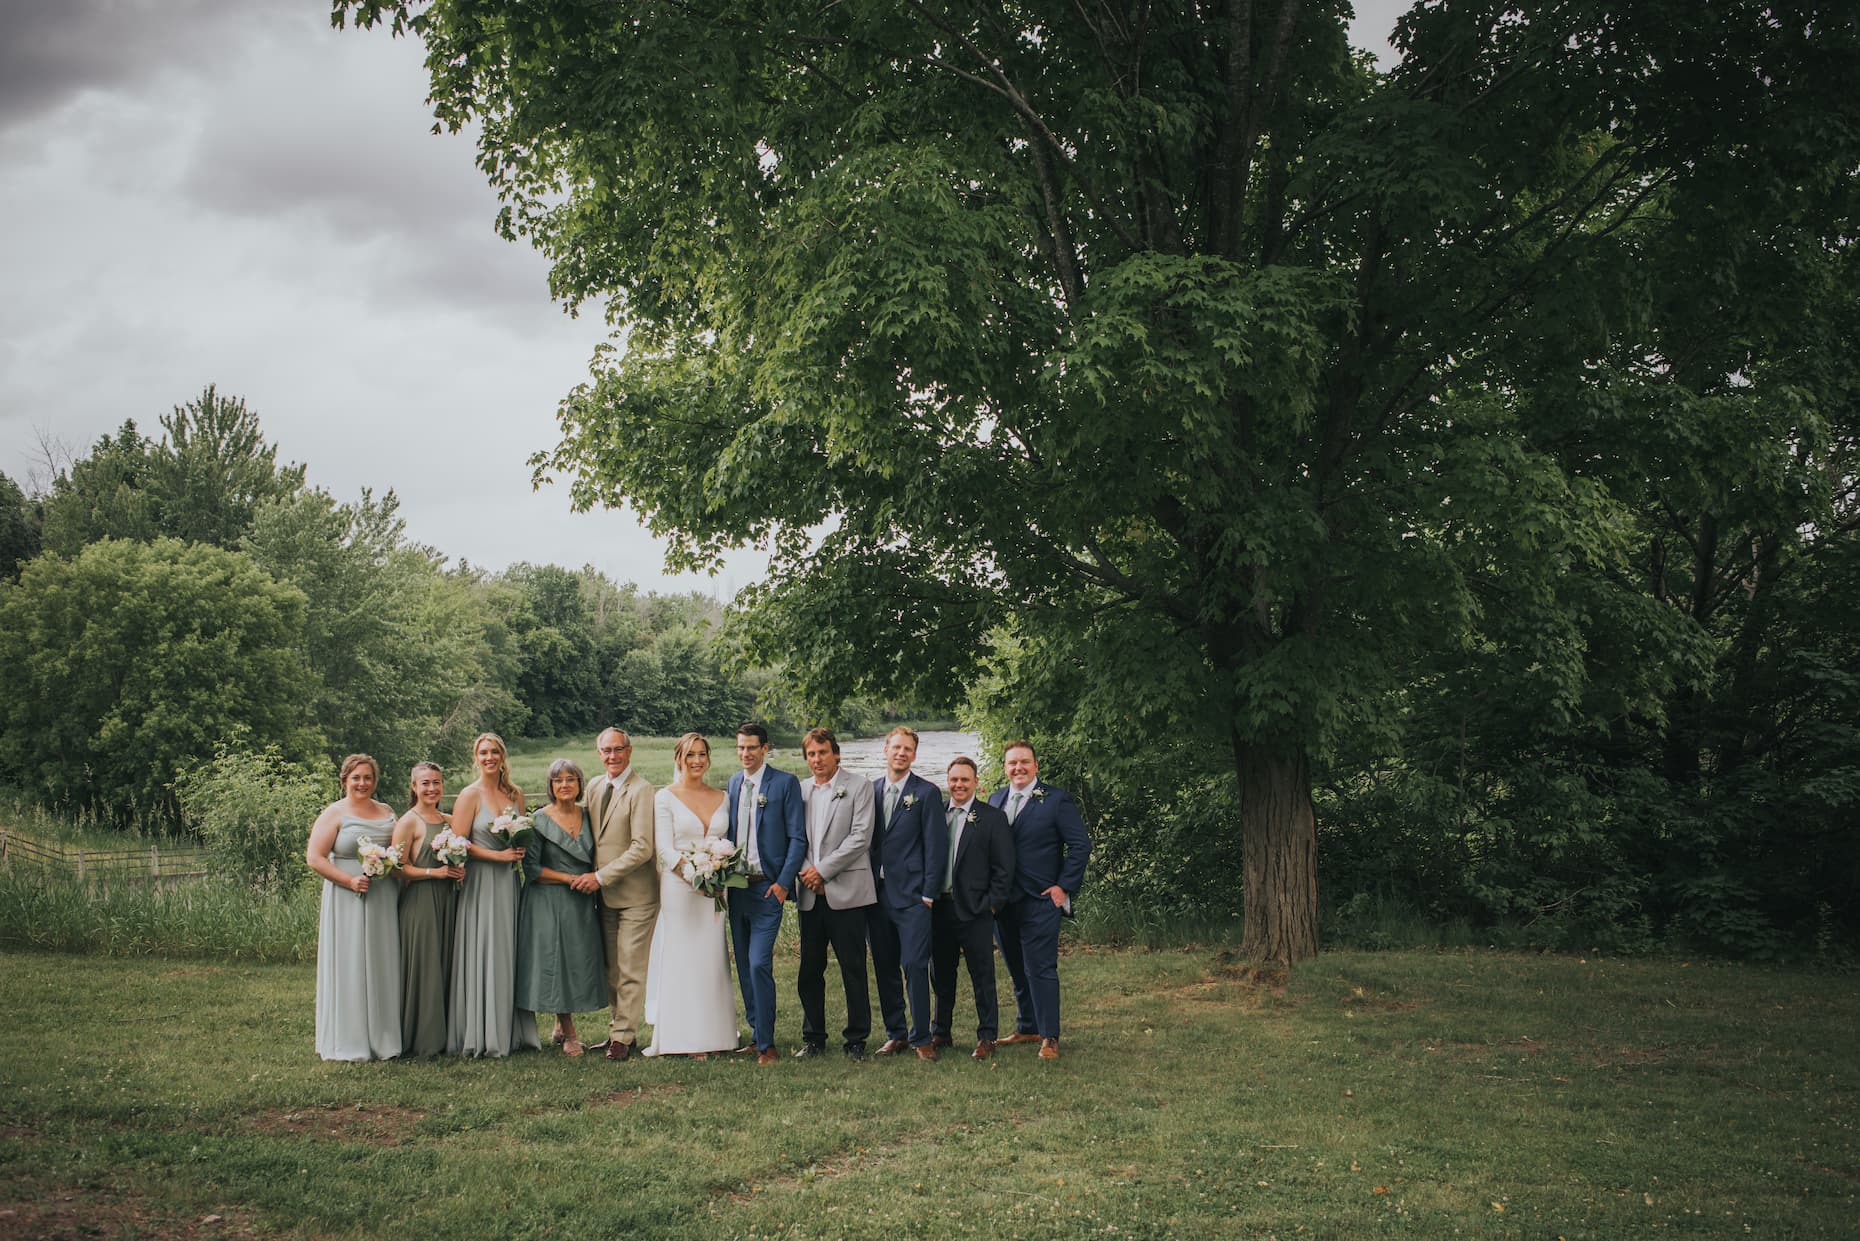 Group Wedding Photography in Manotick